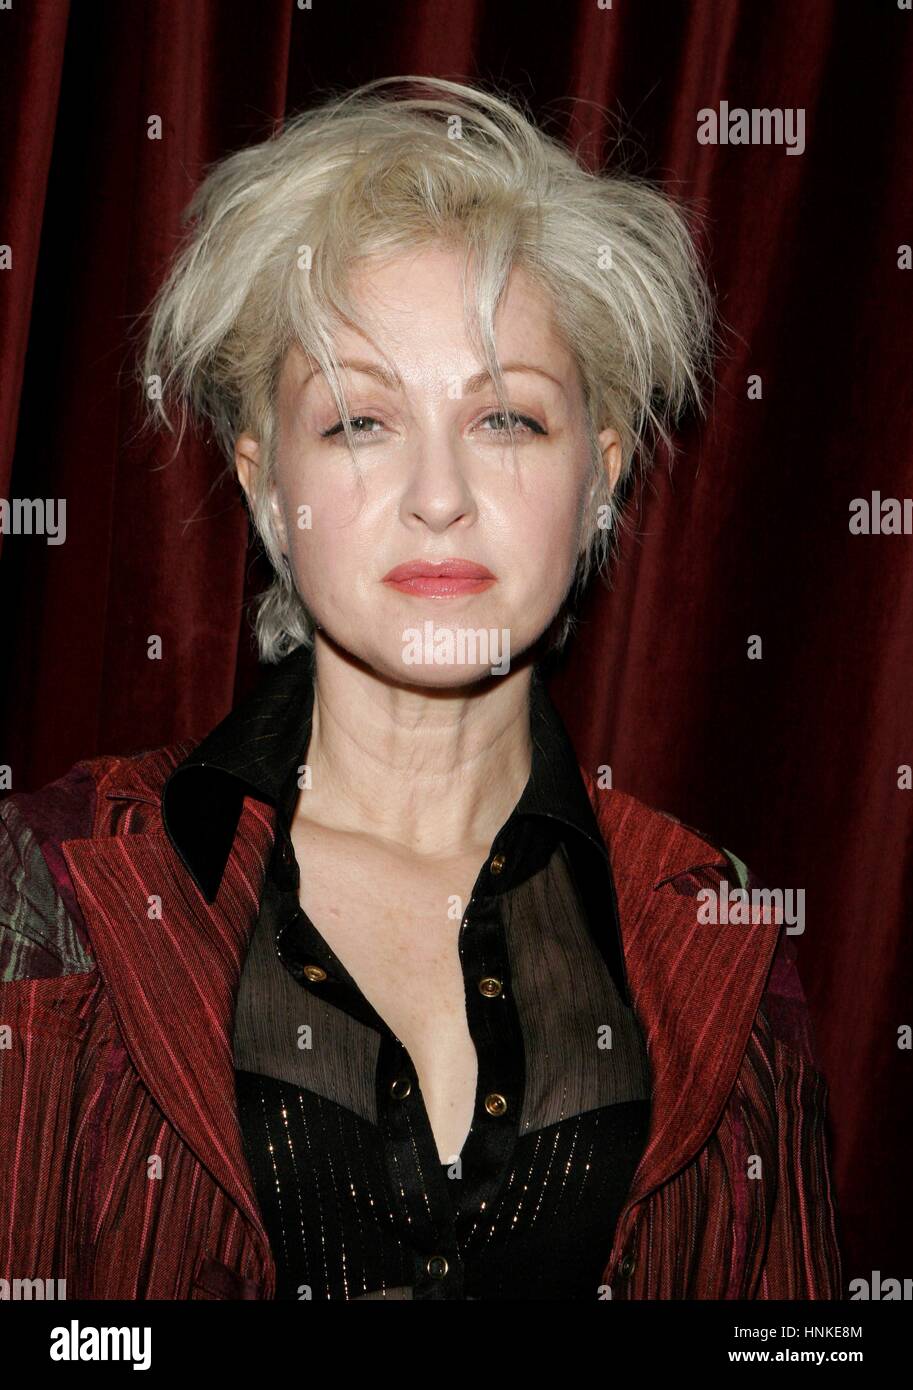 Cyndi Lauper poses for a few pictures after playing new versions of her big hits from her new album 'The Body Acoustic' on October 6 2005 in New York City October 6, 2005 Stock Photo